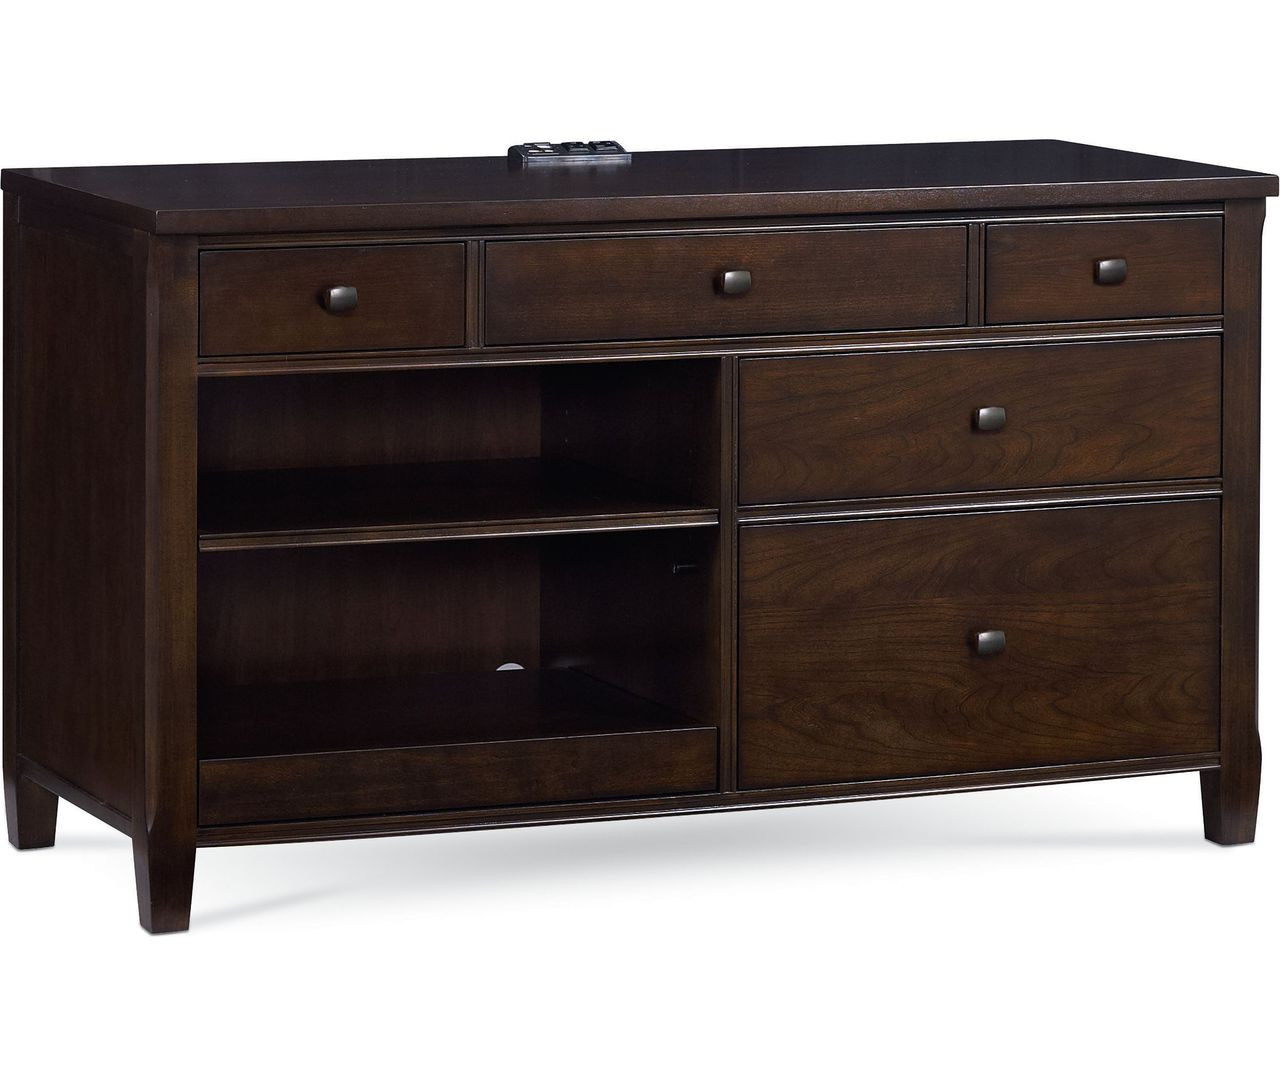 Workstyles Executive Double Pedestal Desk Slater S Home Furnishings